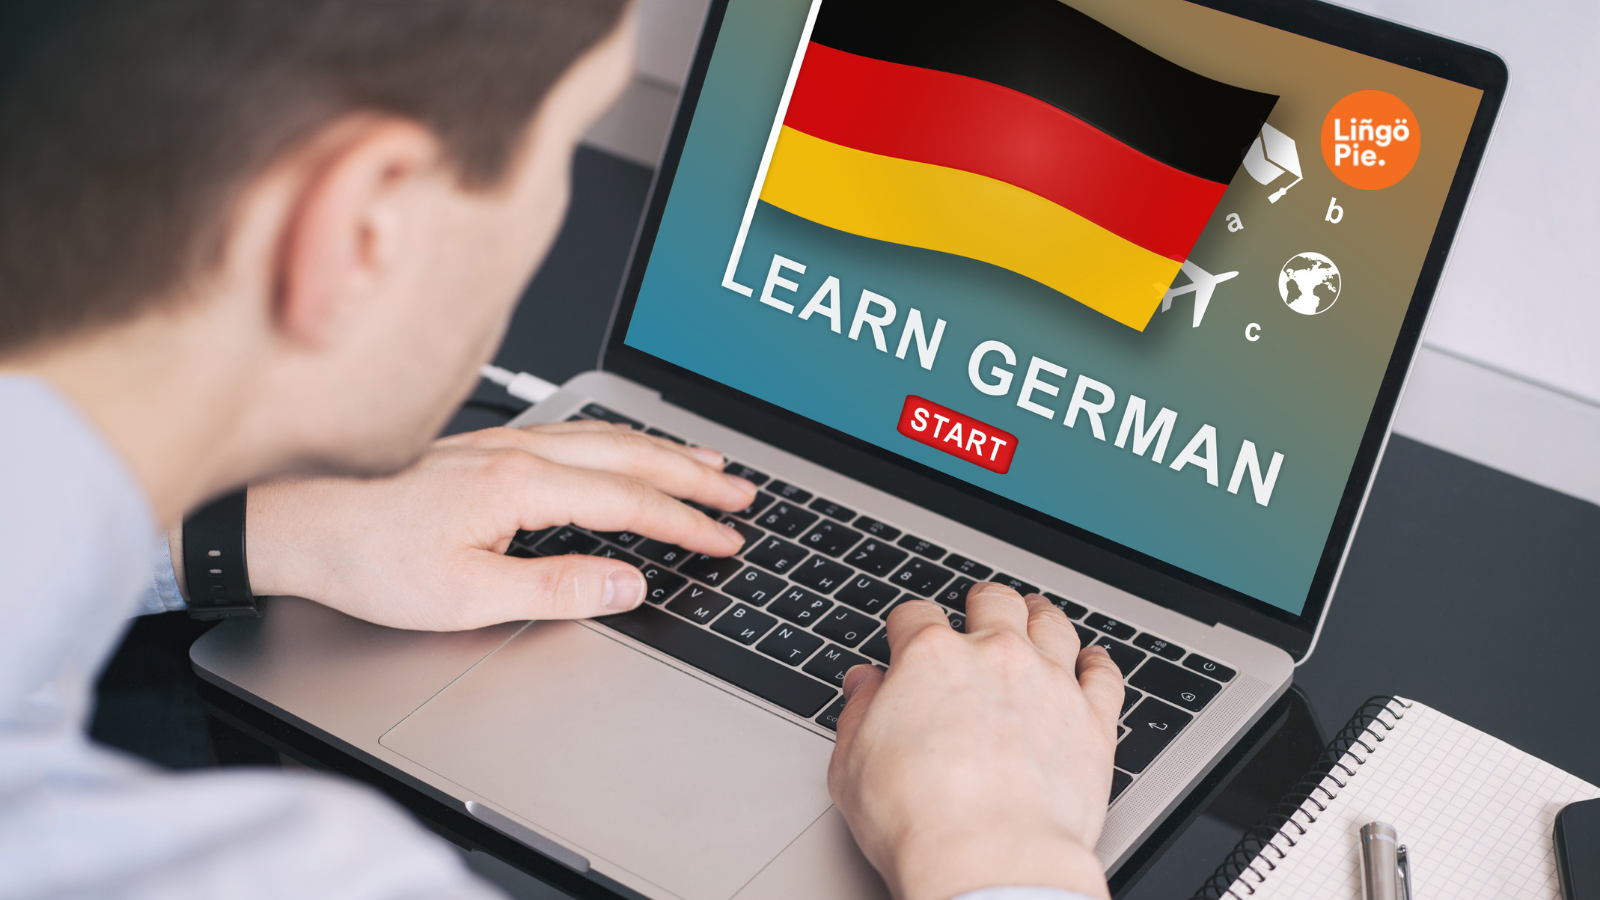 5 Best TV Shows to Learn German Easily